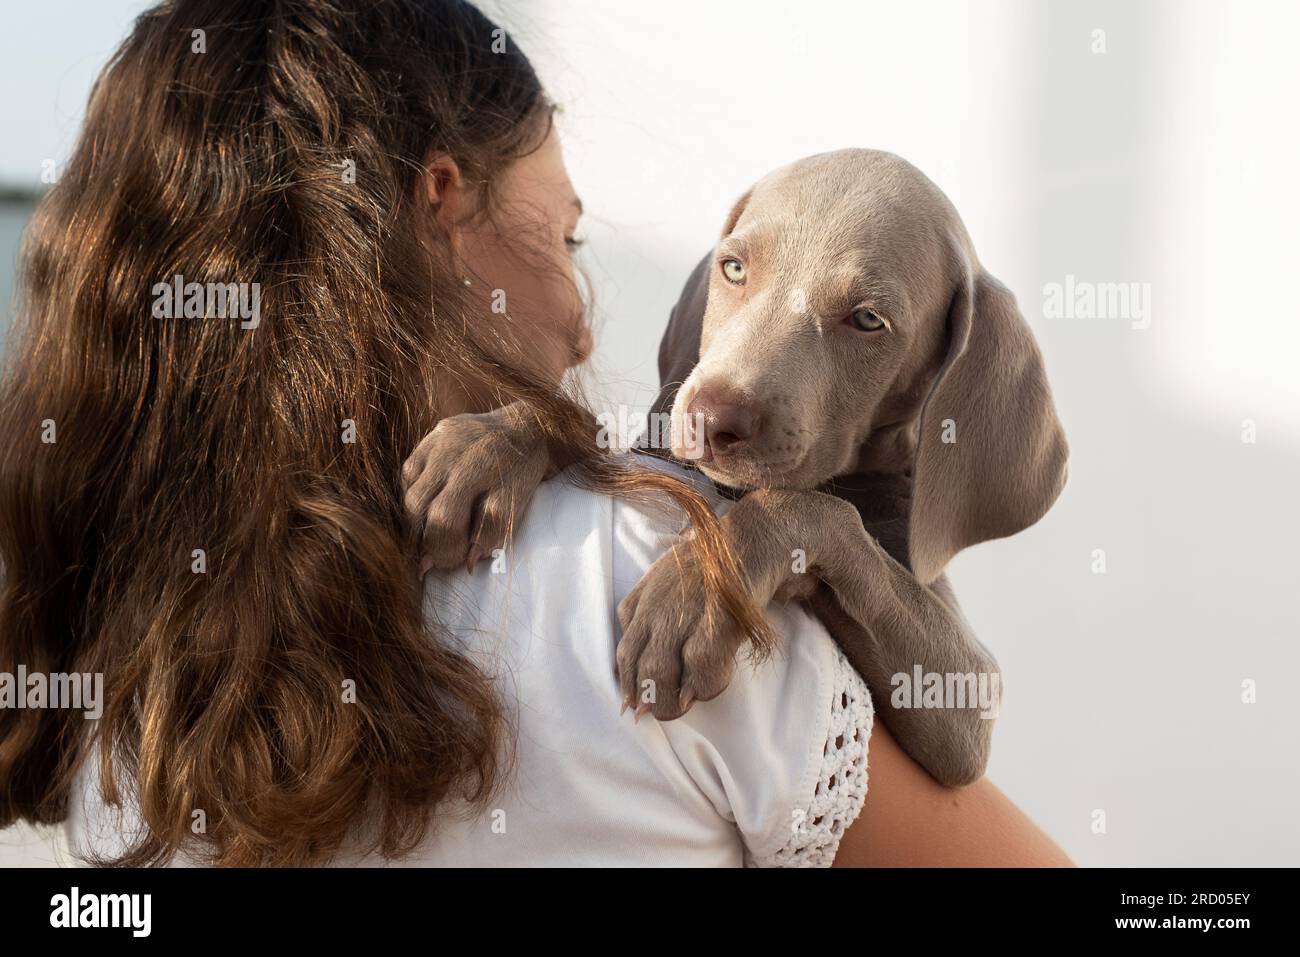 Weimaraner puppy peeking over his owner's shoulder. Girl holding her puppy in her arms. Animal welfare Stock Photo